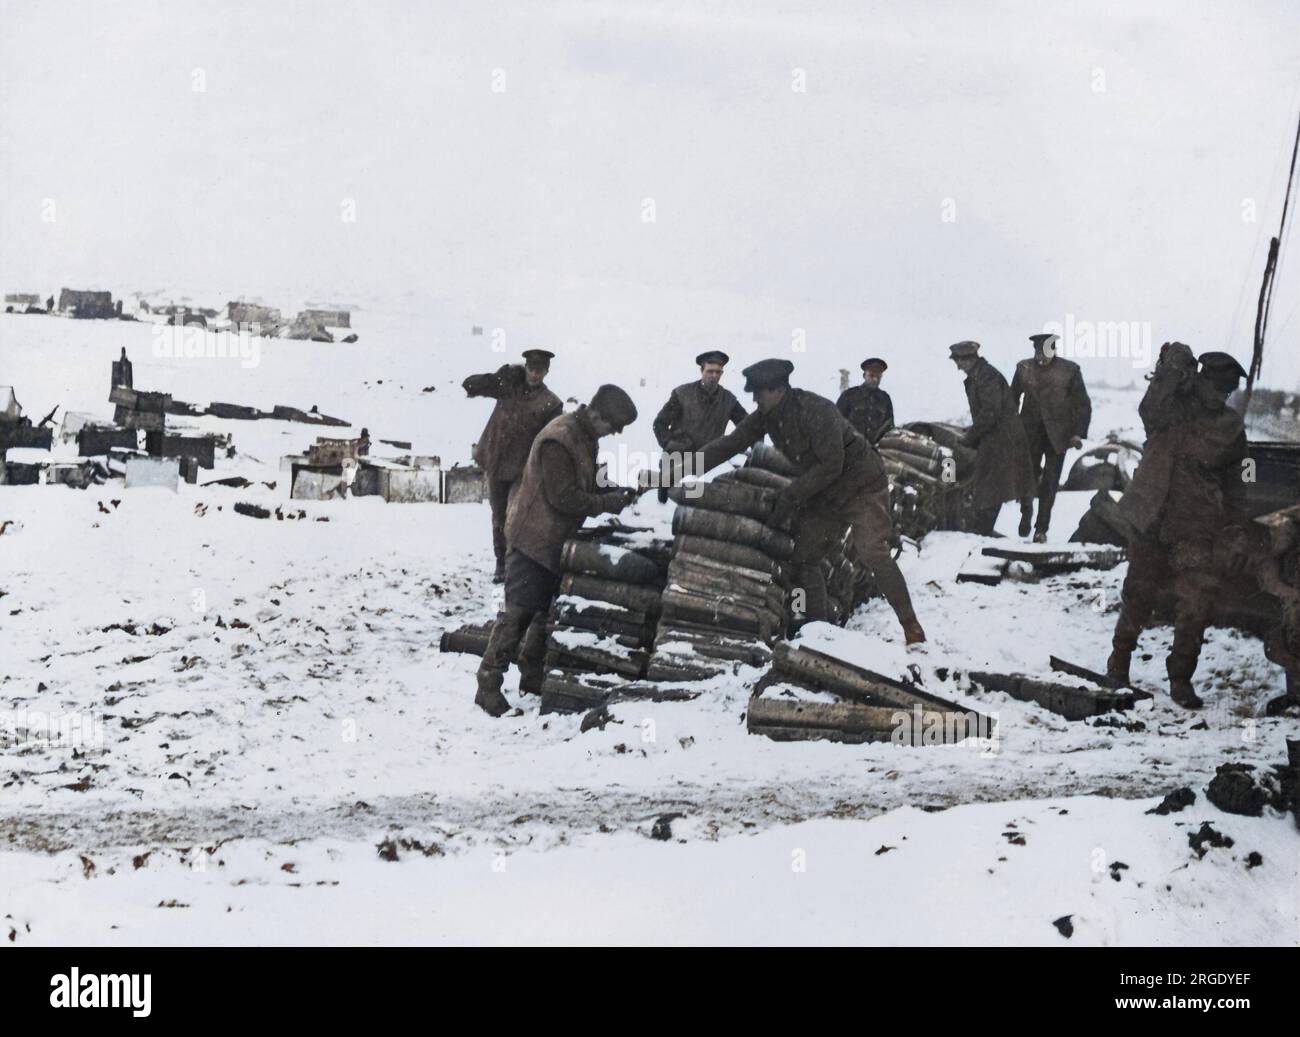 British artillerymen sorting shells in the snow on the Western Front during World War One. Stock Photo